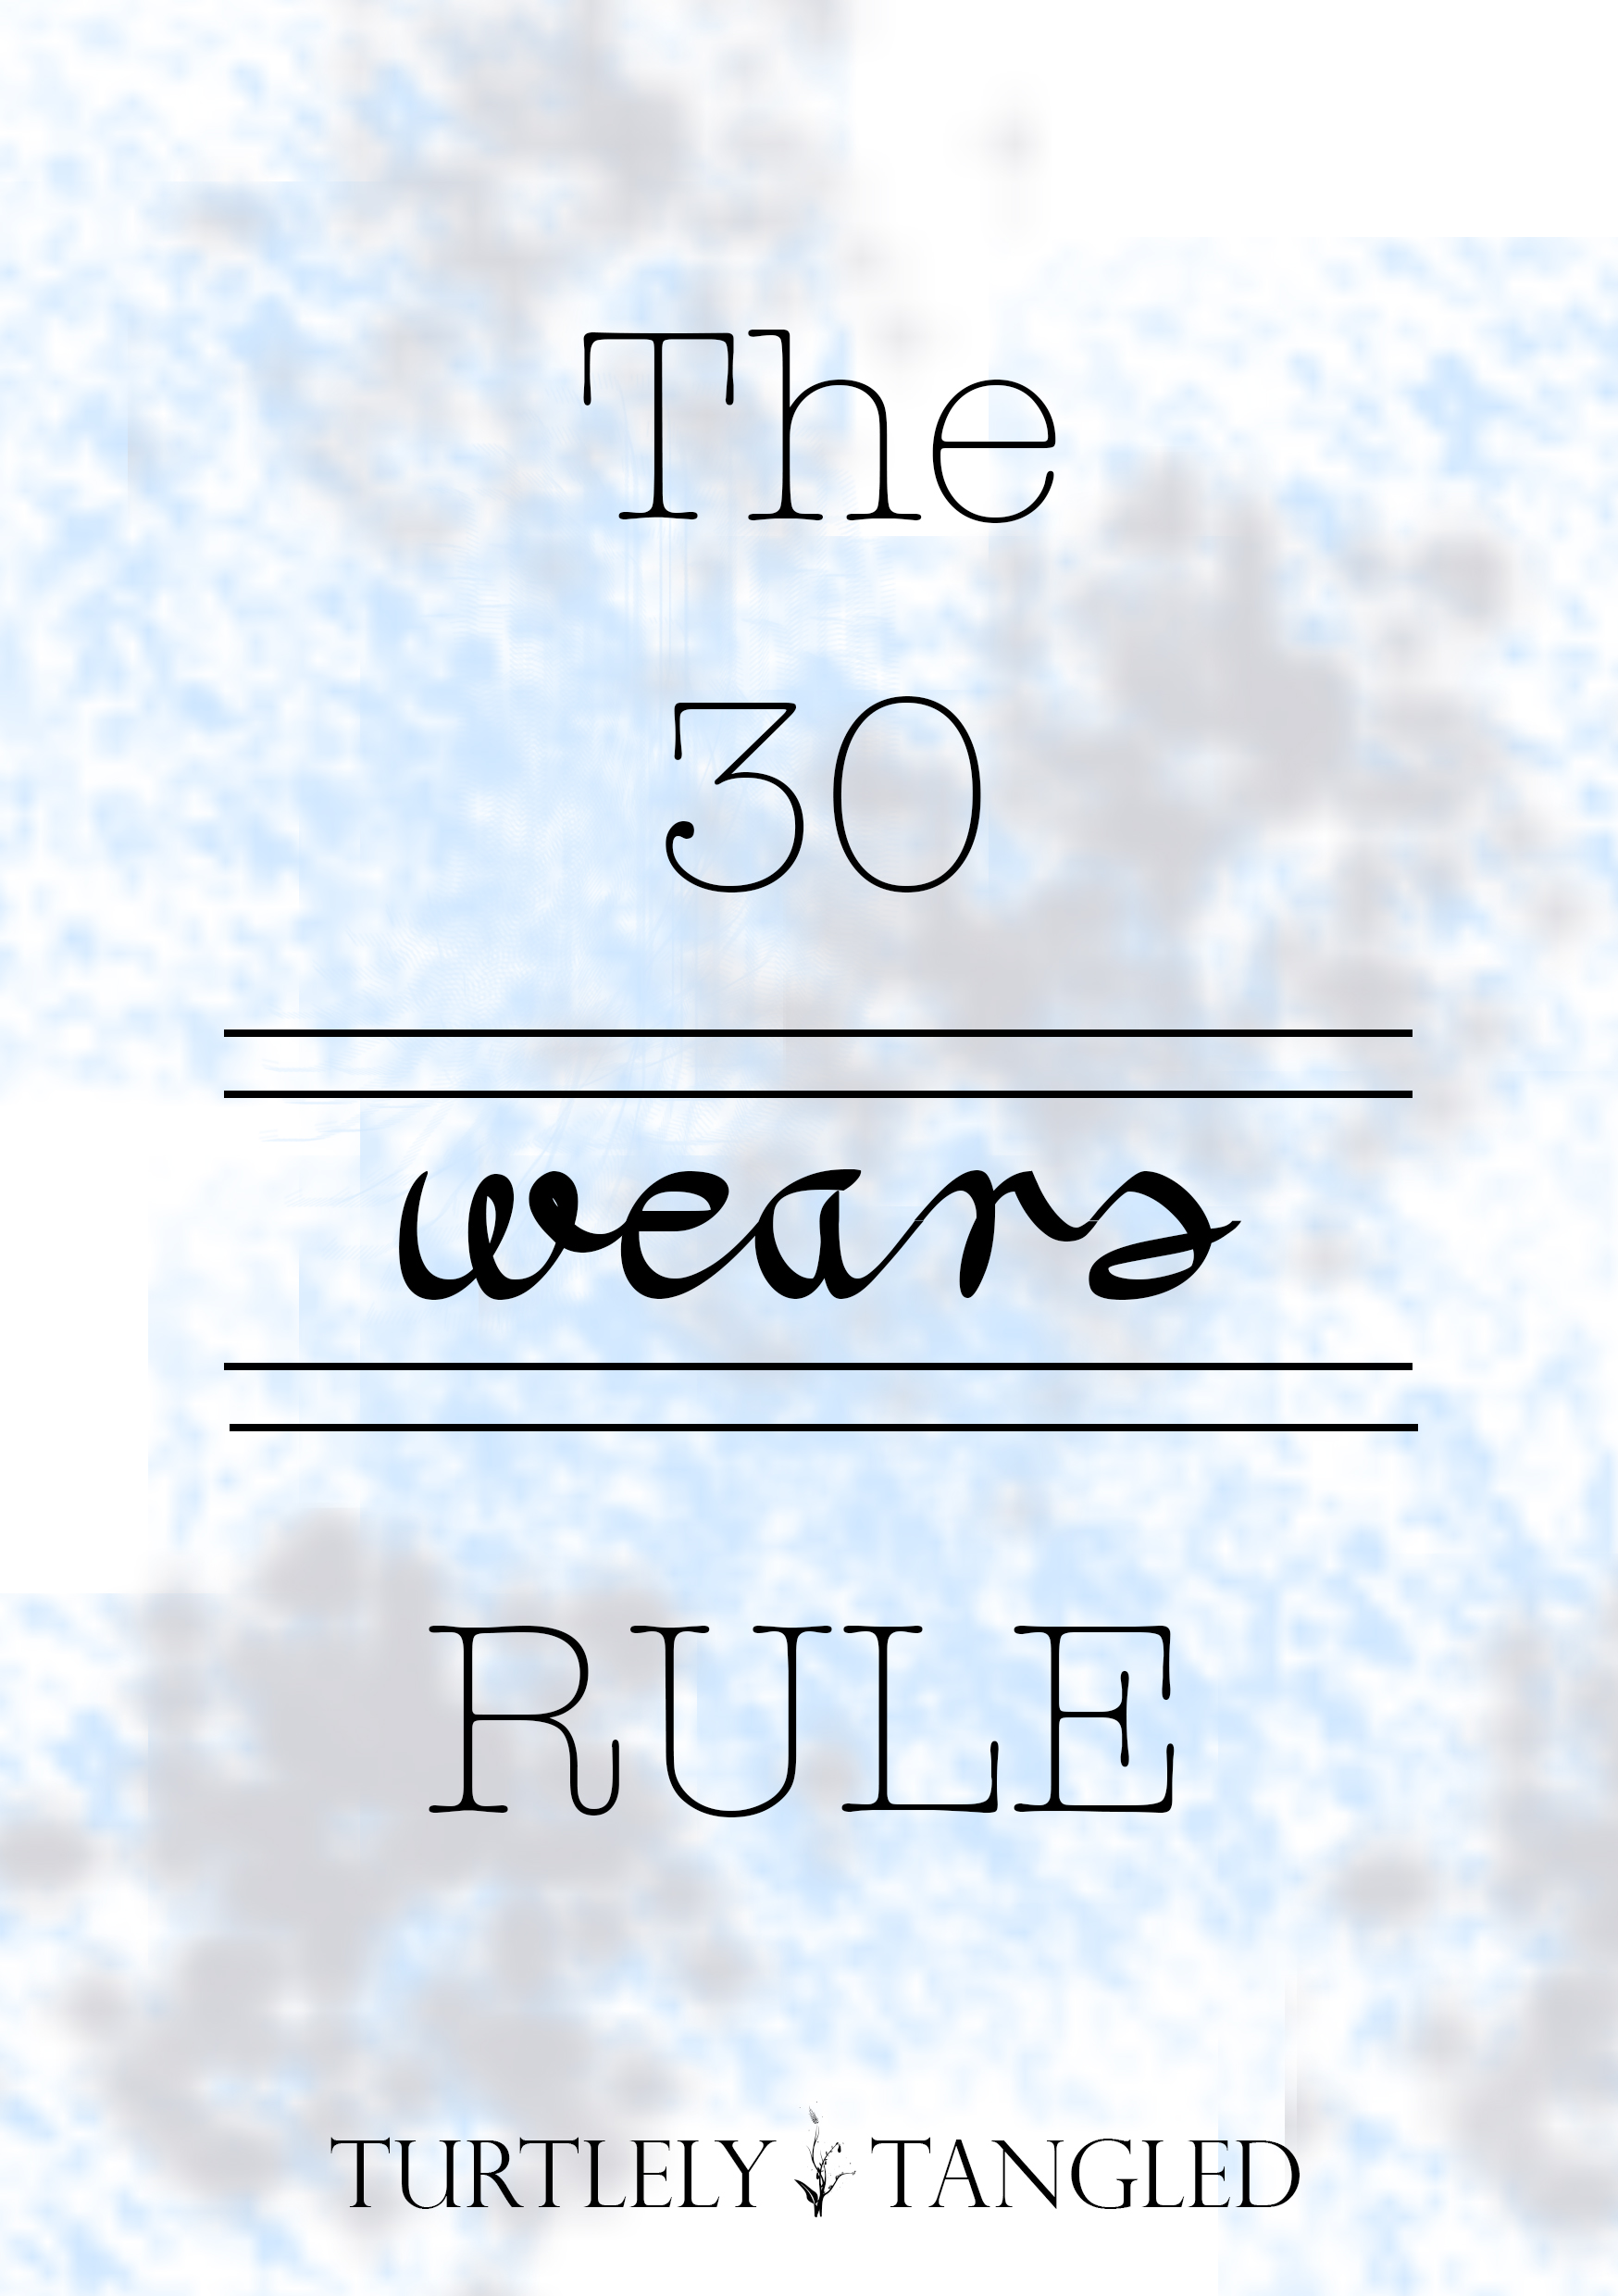 How Many Times Do We Wear Our Clothes? (Not Enough!), Sustainable Fashion  Blog